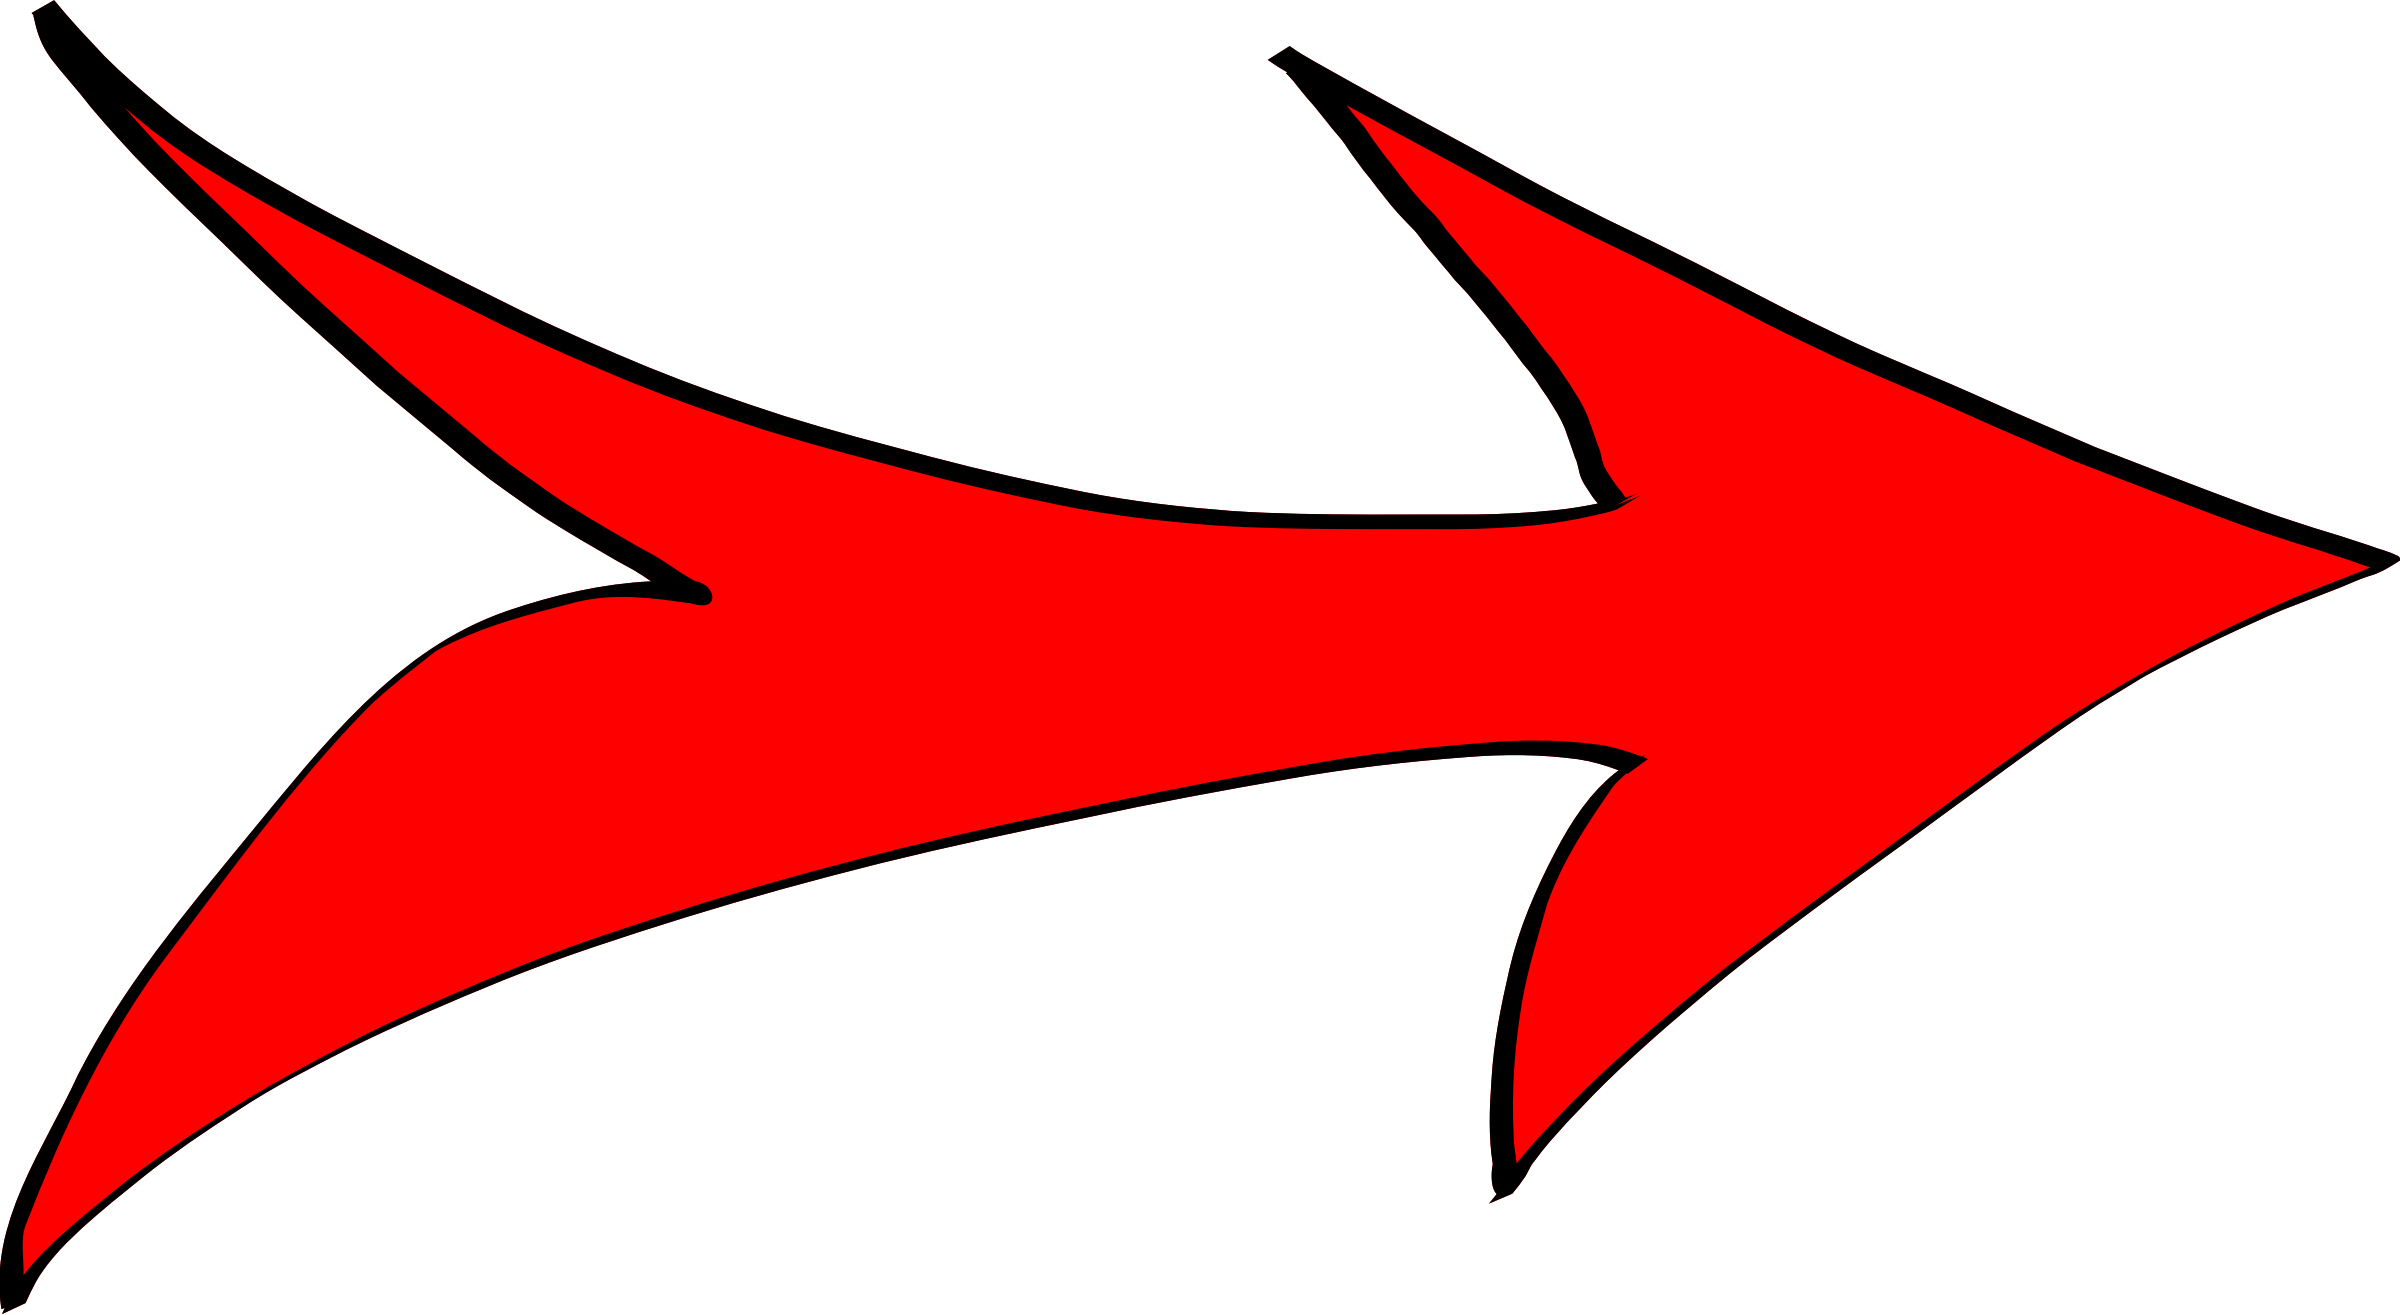 Download Red Arrow Vector Clipart image - Free stock photo - Public Domain photo - CC0 Images